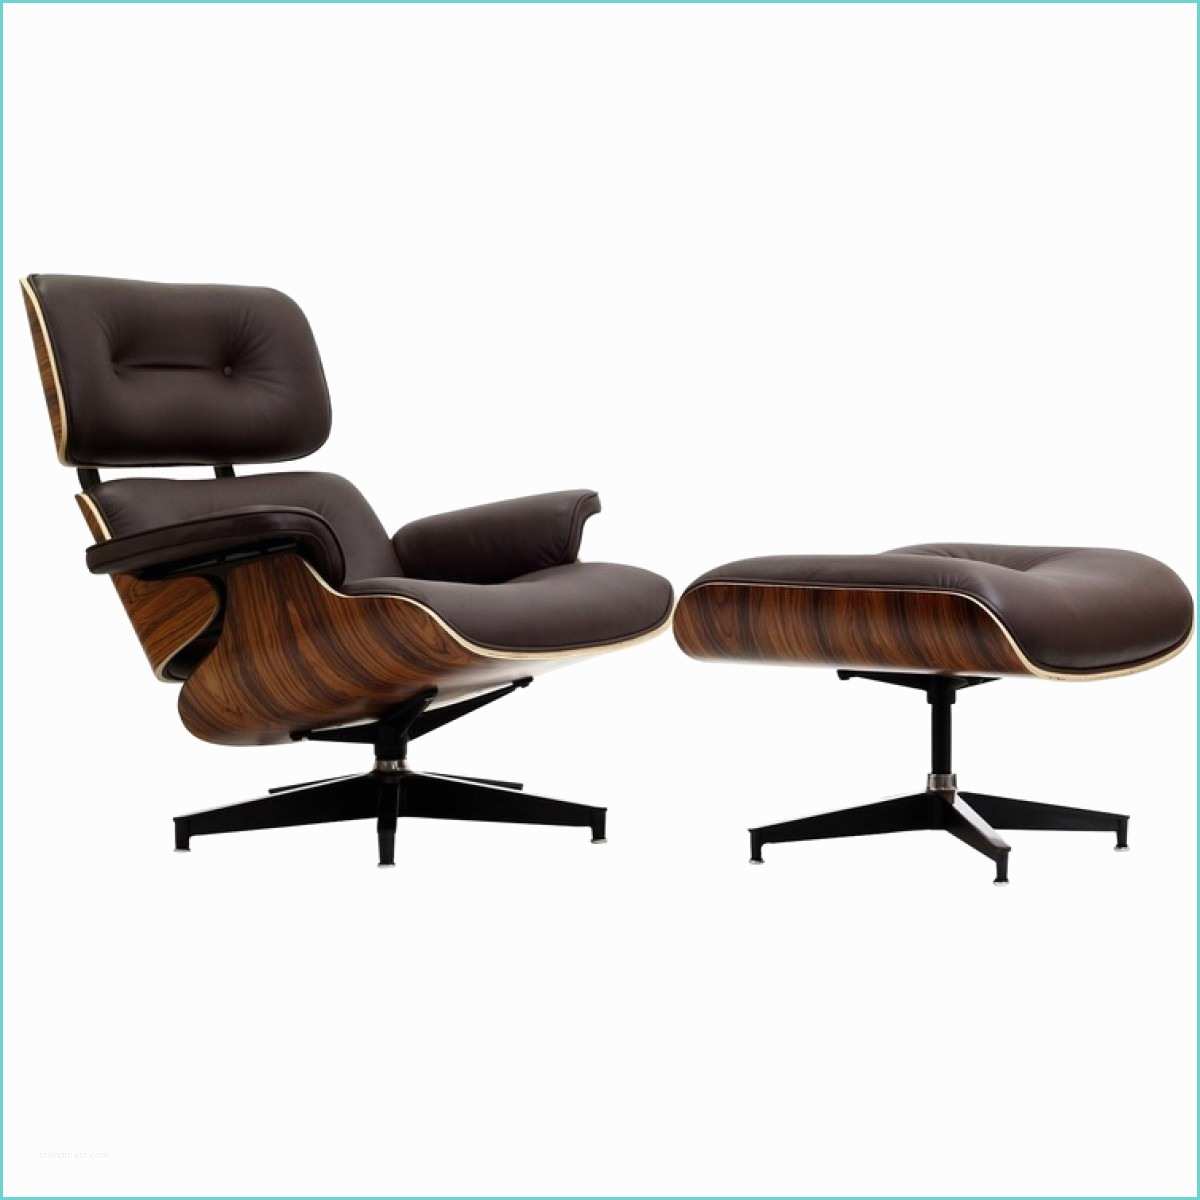 Eames Chair Replica Eames Style Lounge Chair and Ottoman Brown Leather Walnut